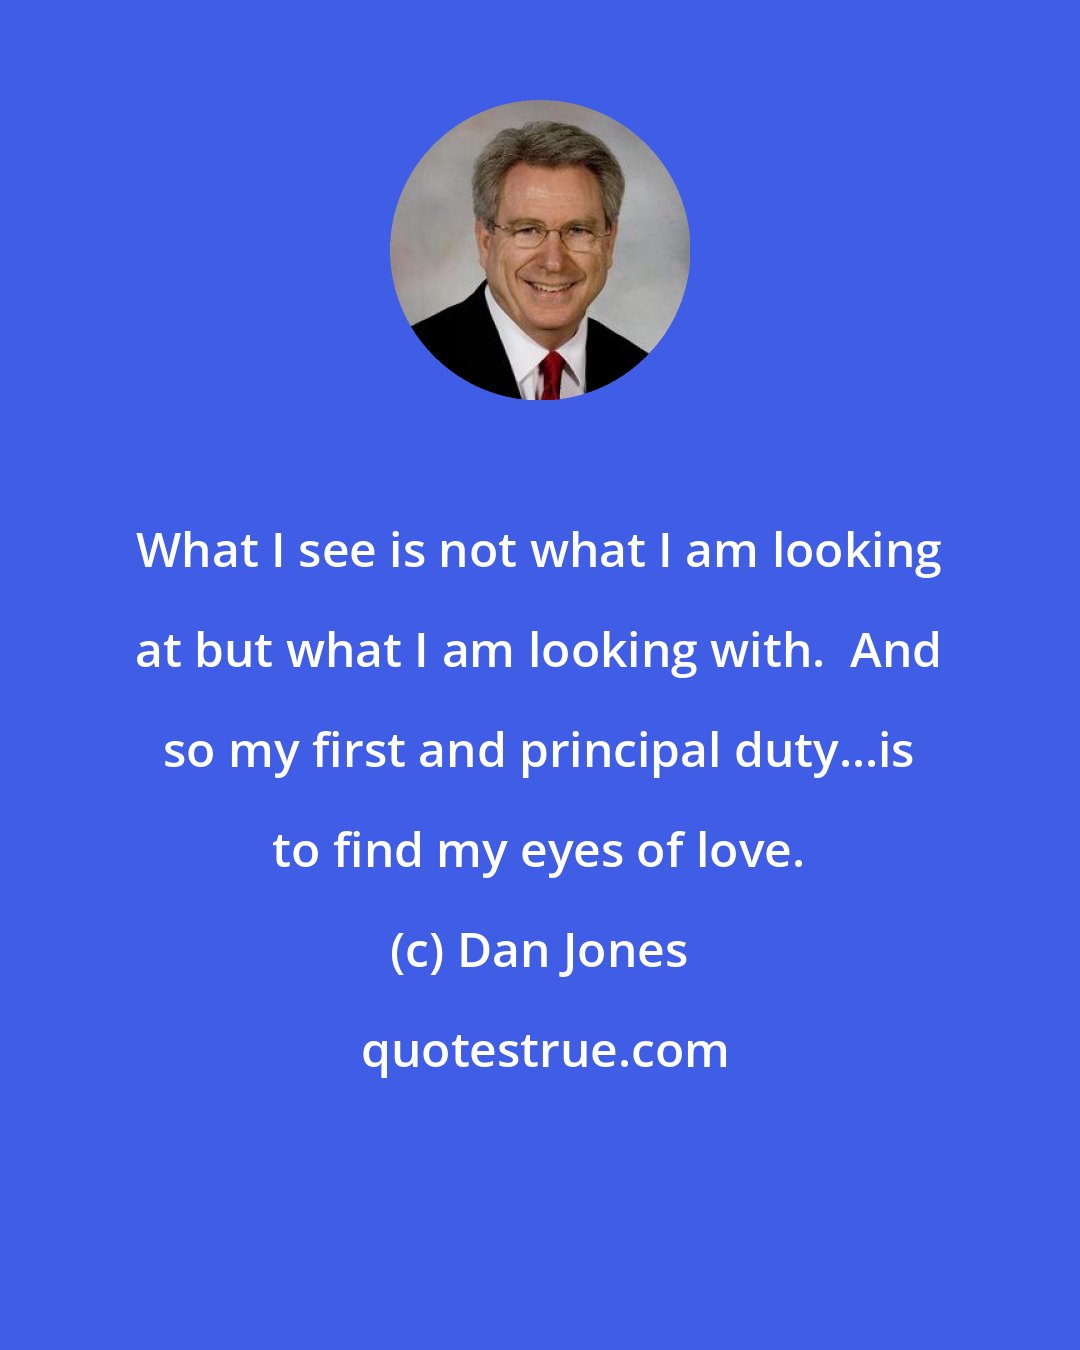 Dan Jones: What I see is not what I am looking at but what I am looking with.  And so my first and principal duty...is to find my eyes of love.